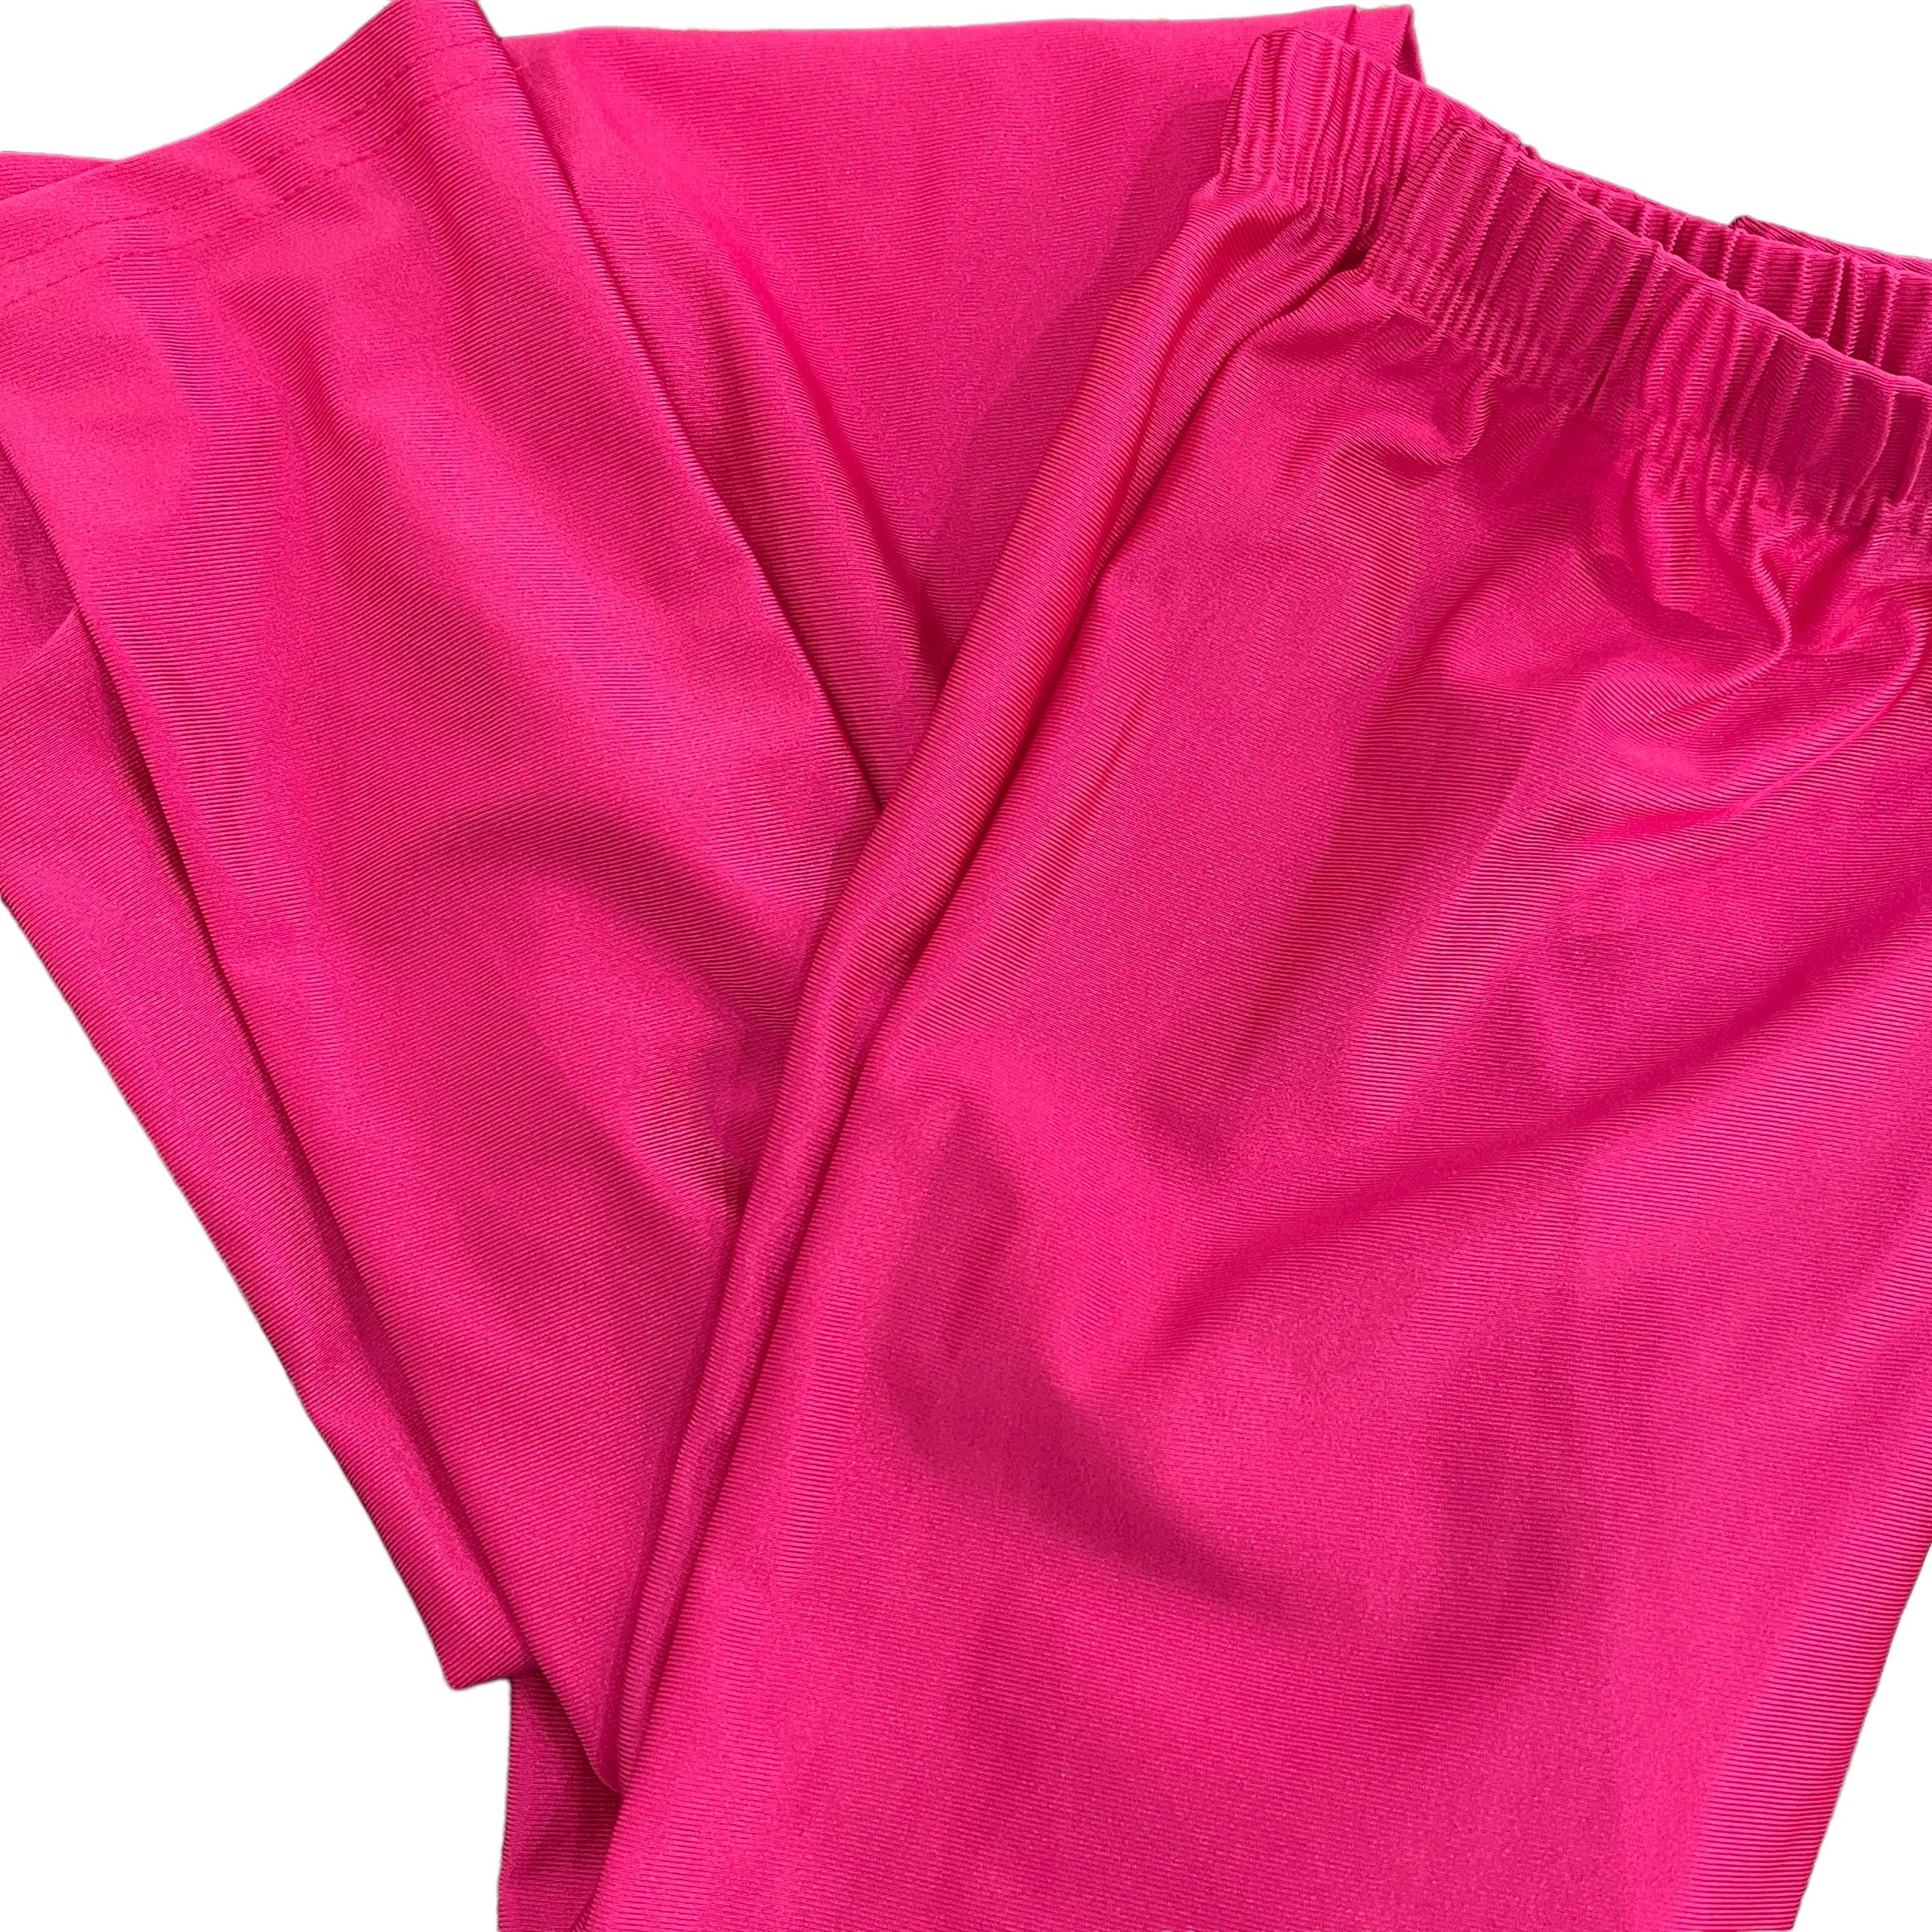 IE shimmer leggings colors - Vintage India NYC